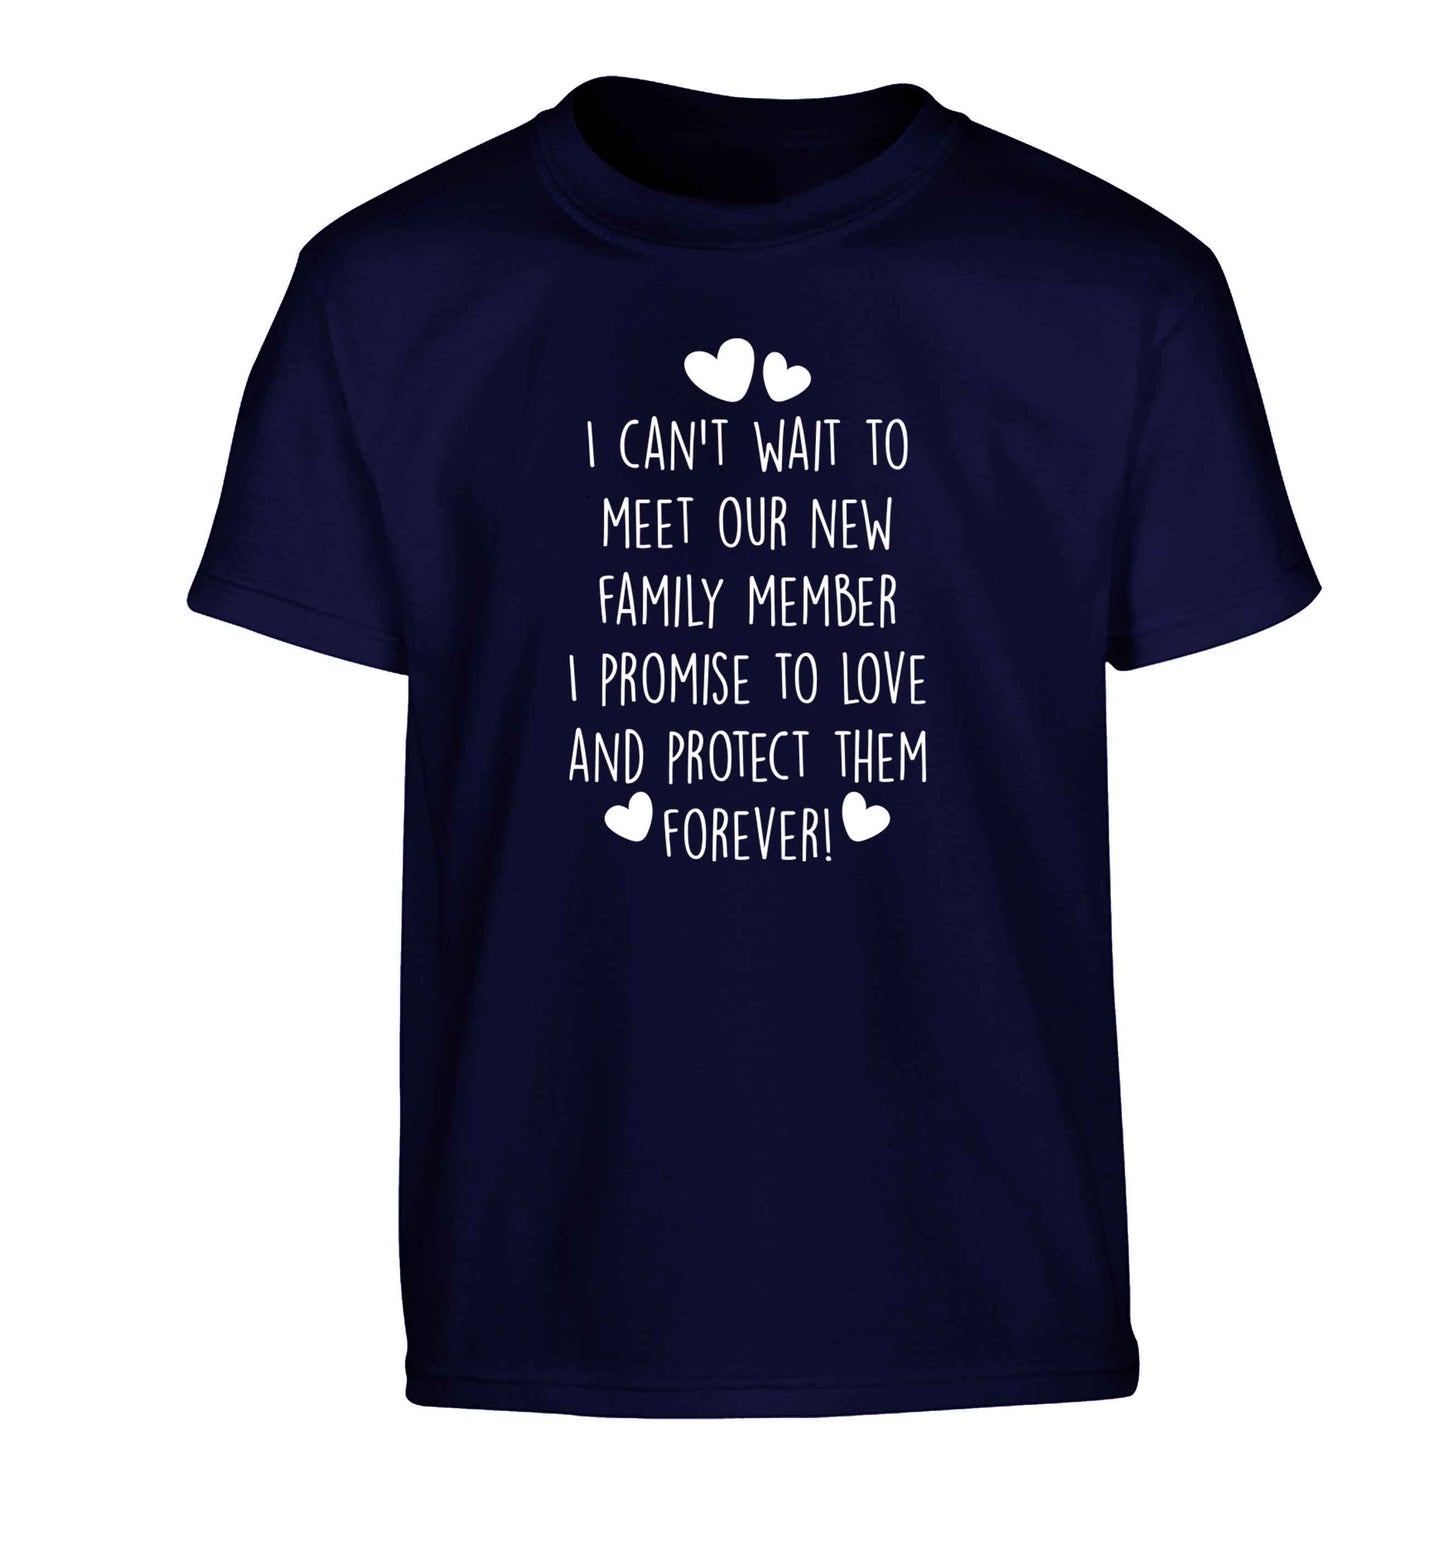 I can't wait to meet our new family member I promise to love and protect them foreverChildren's navy Tshirt 12-13 Years